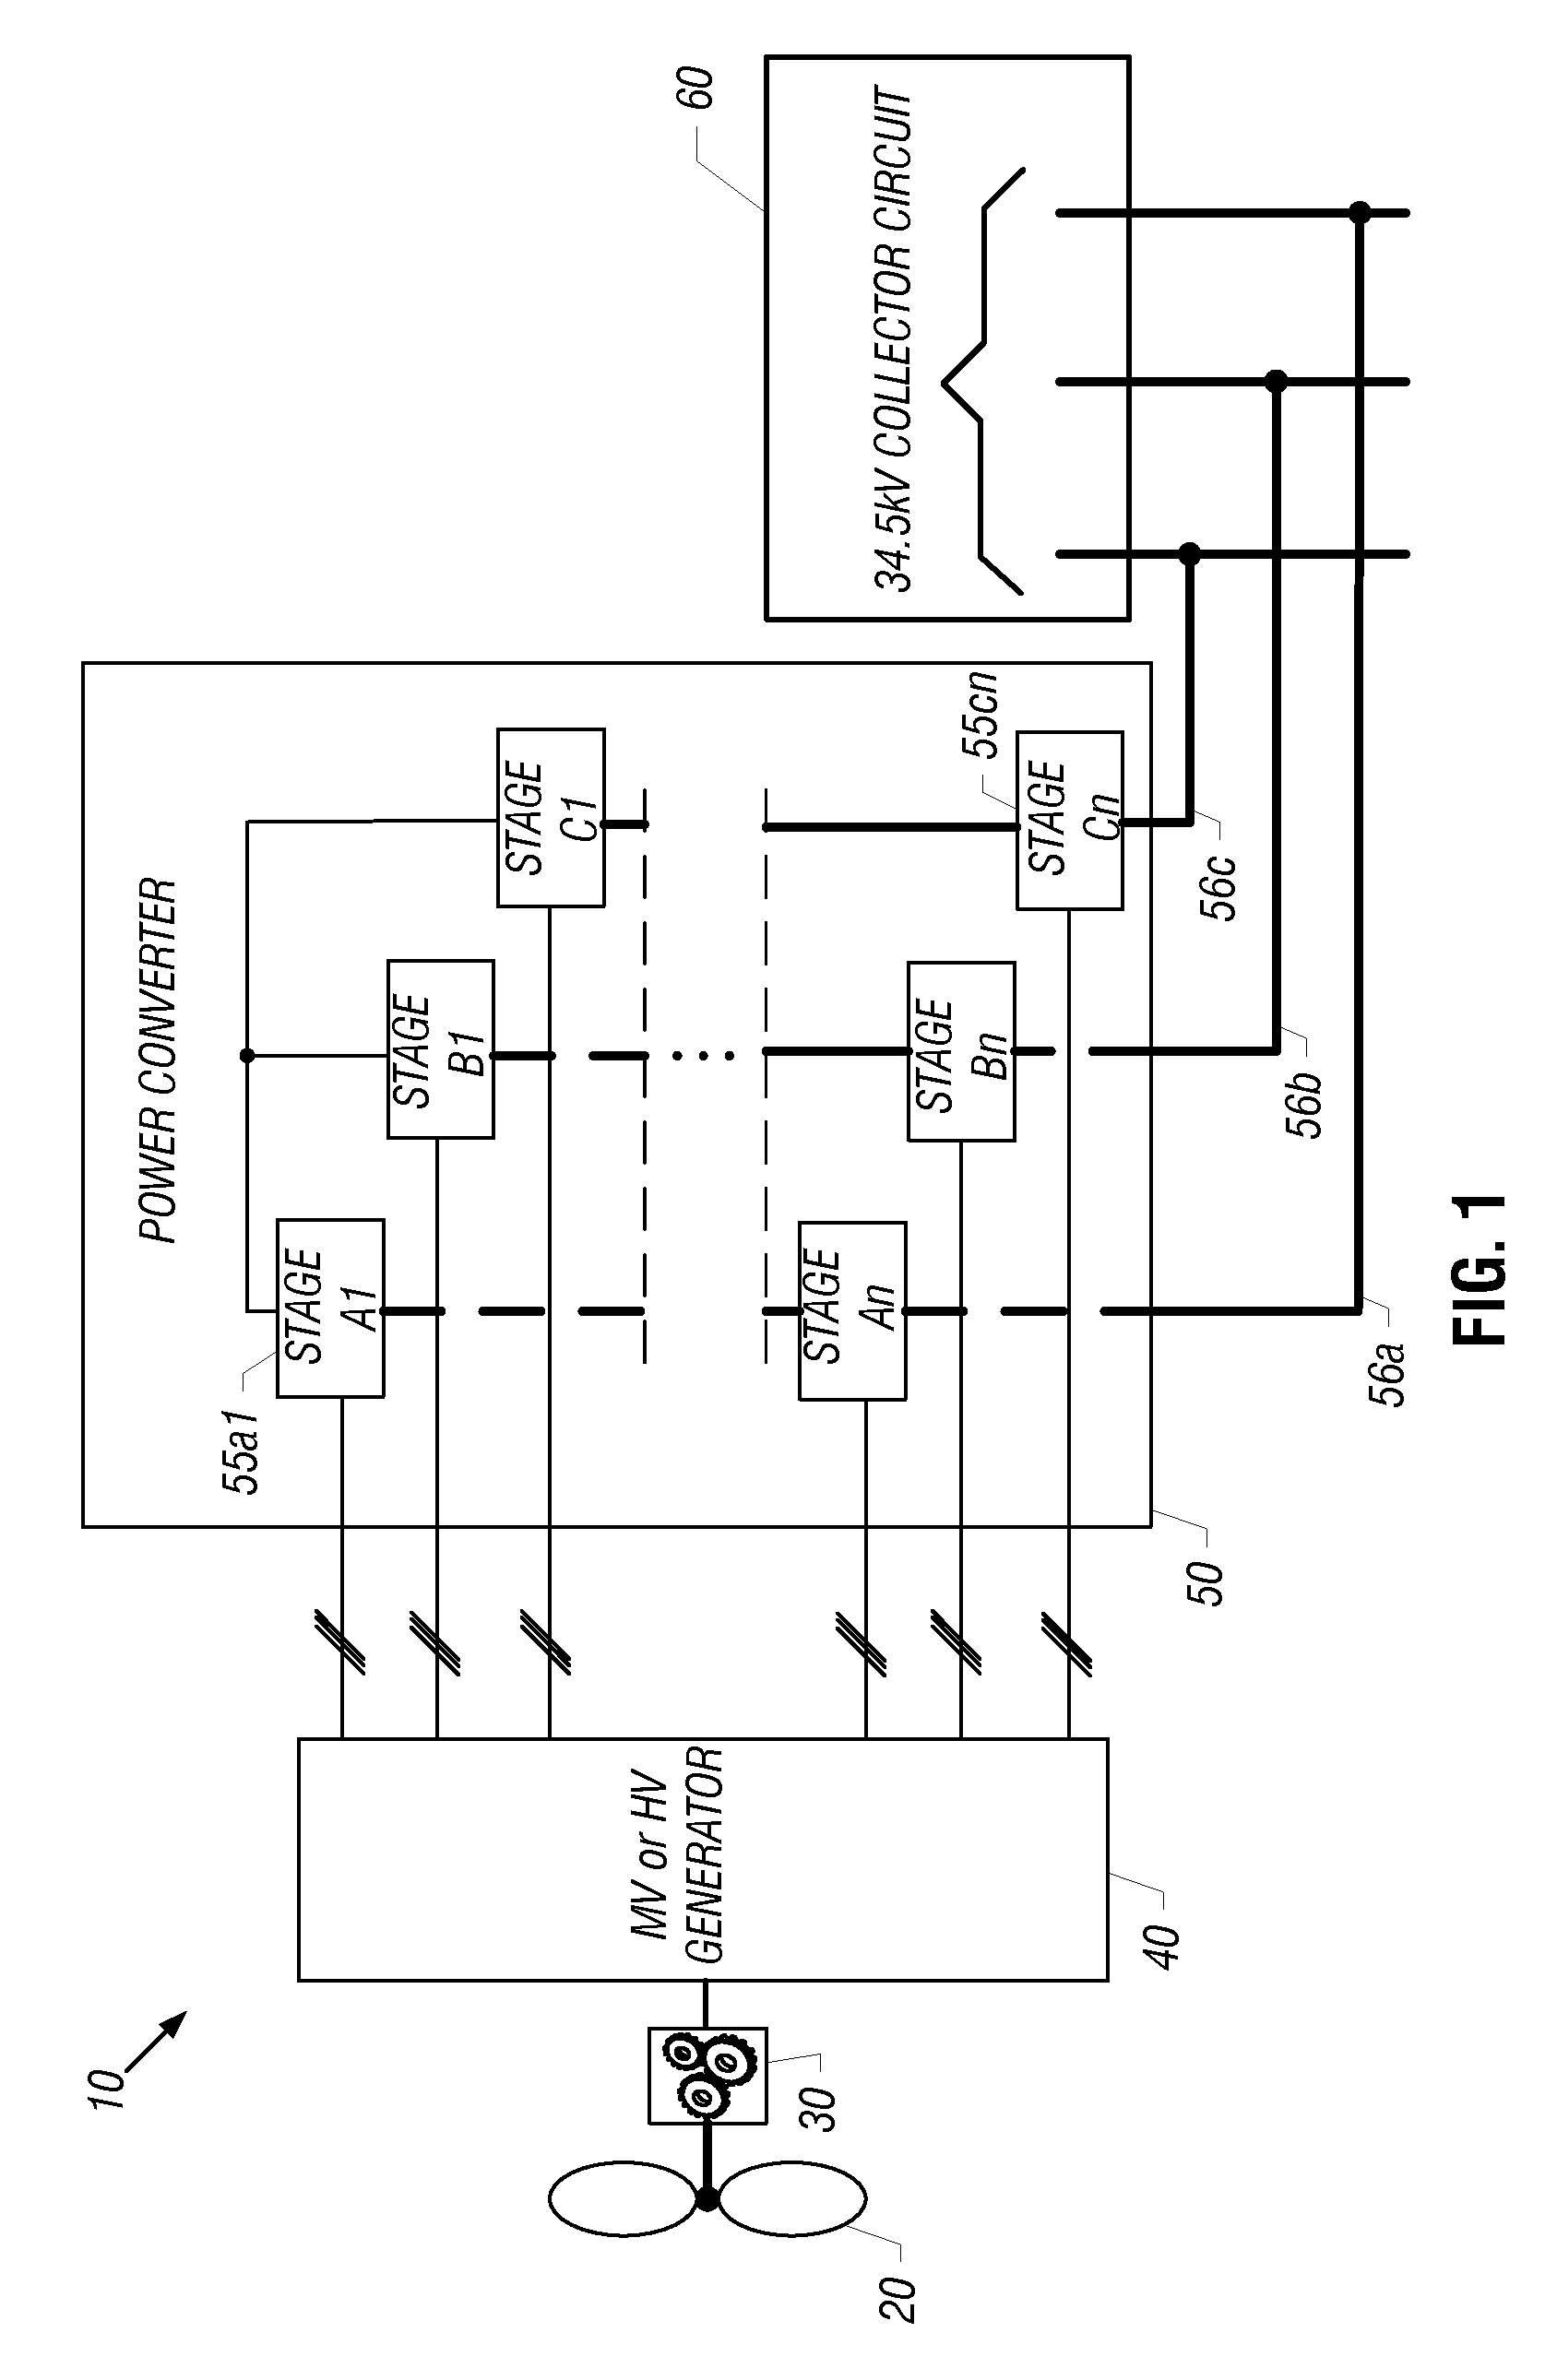 Power Converter For Use With Wind Generator